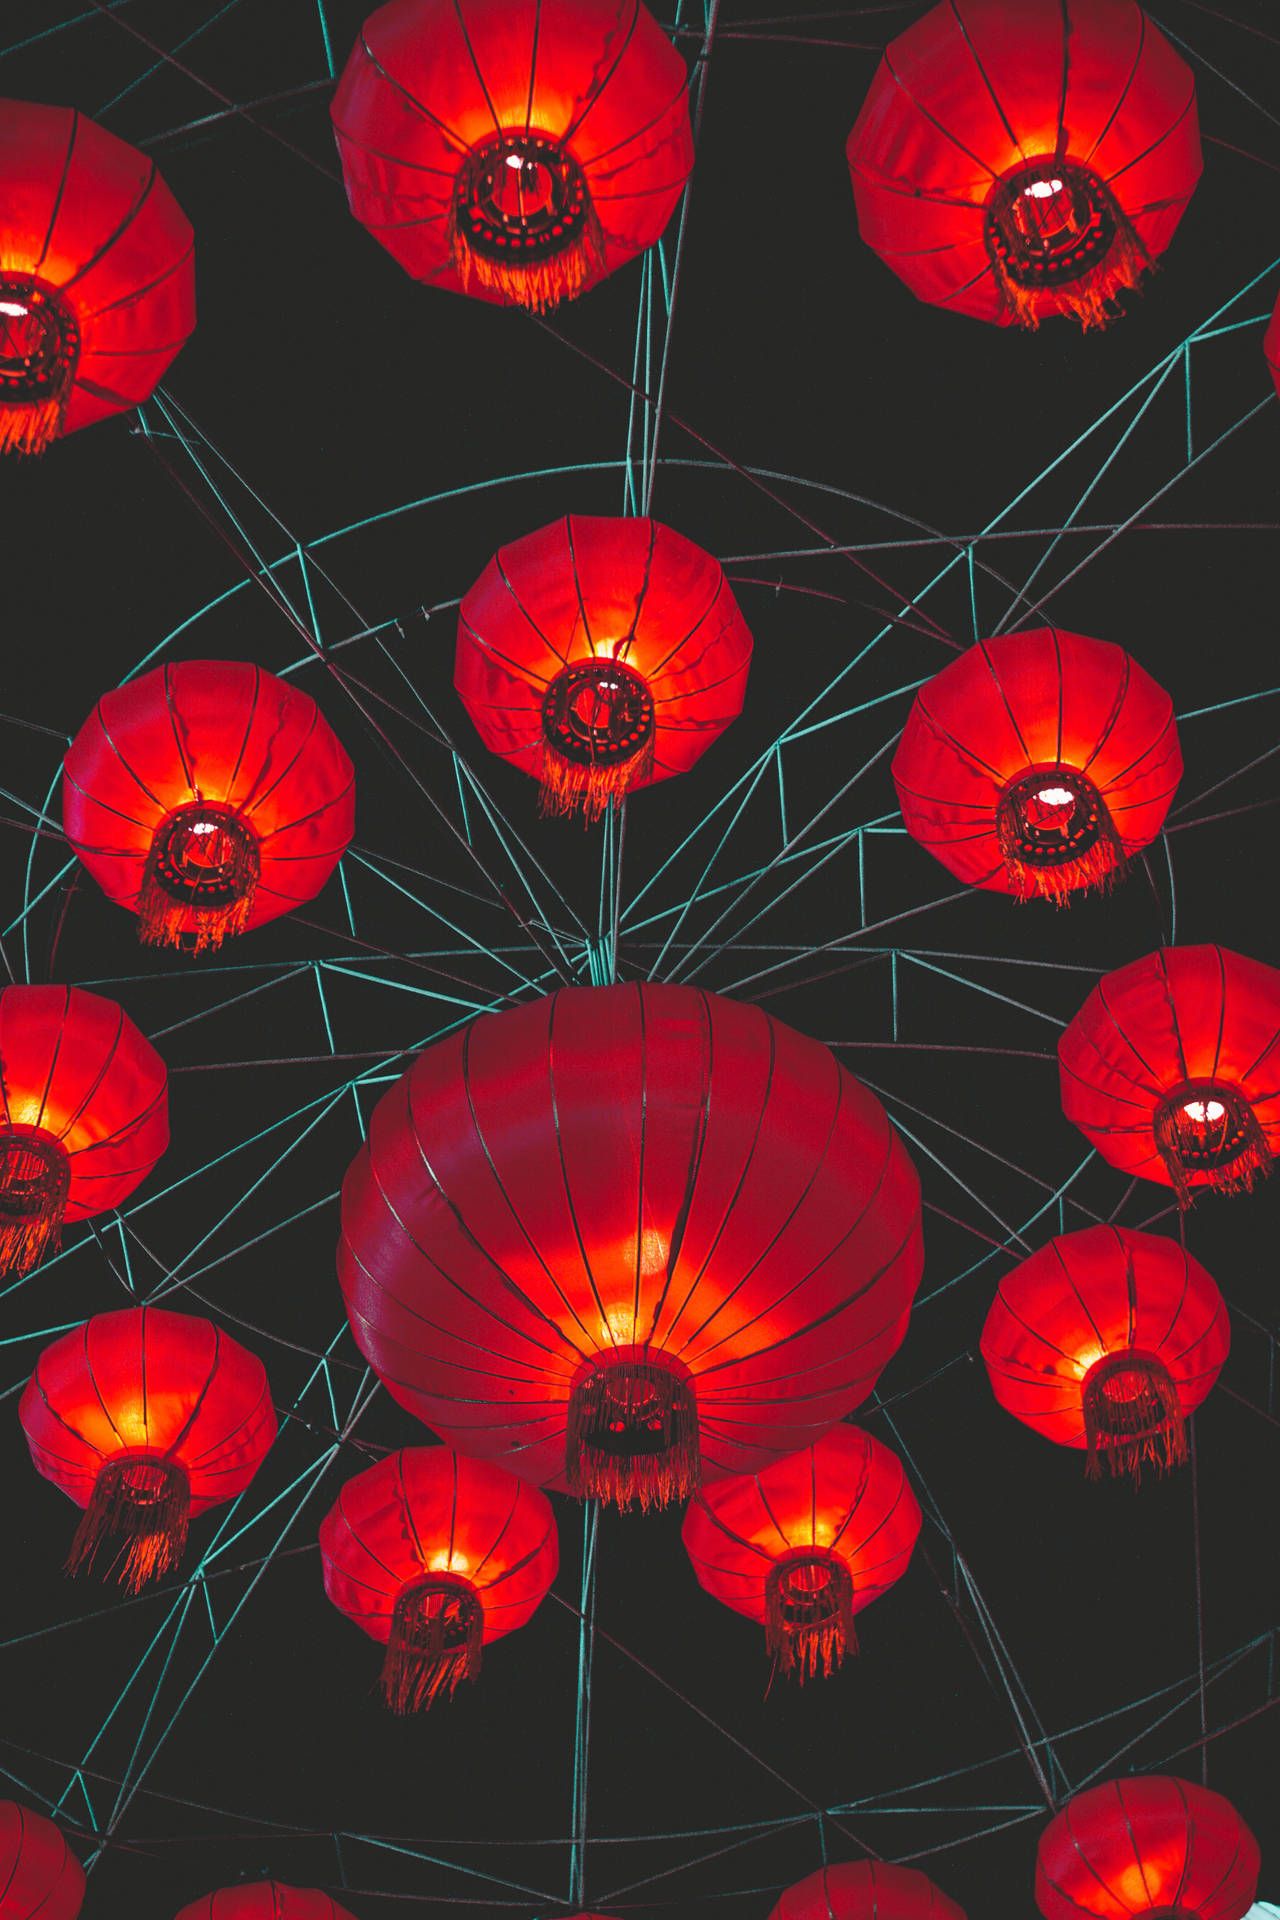 Red lanterns in the night sky - Chinese